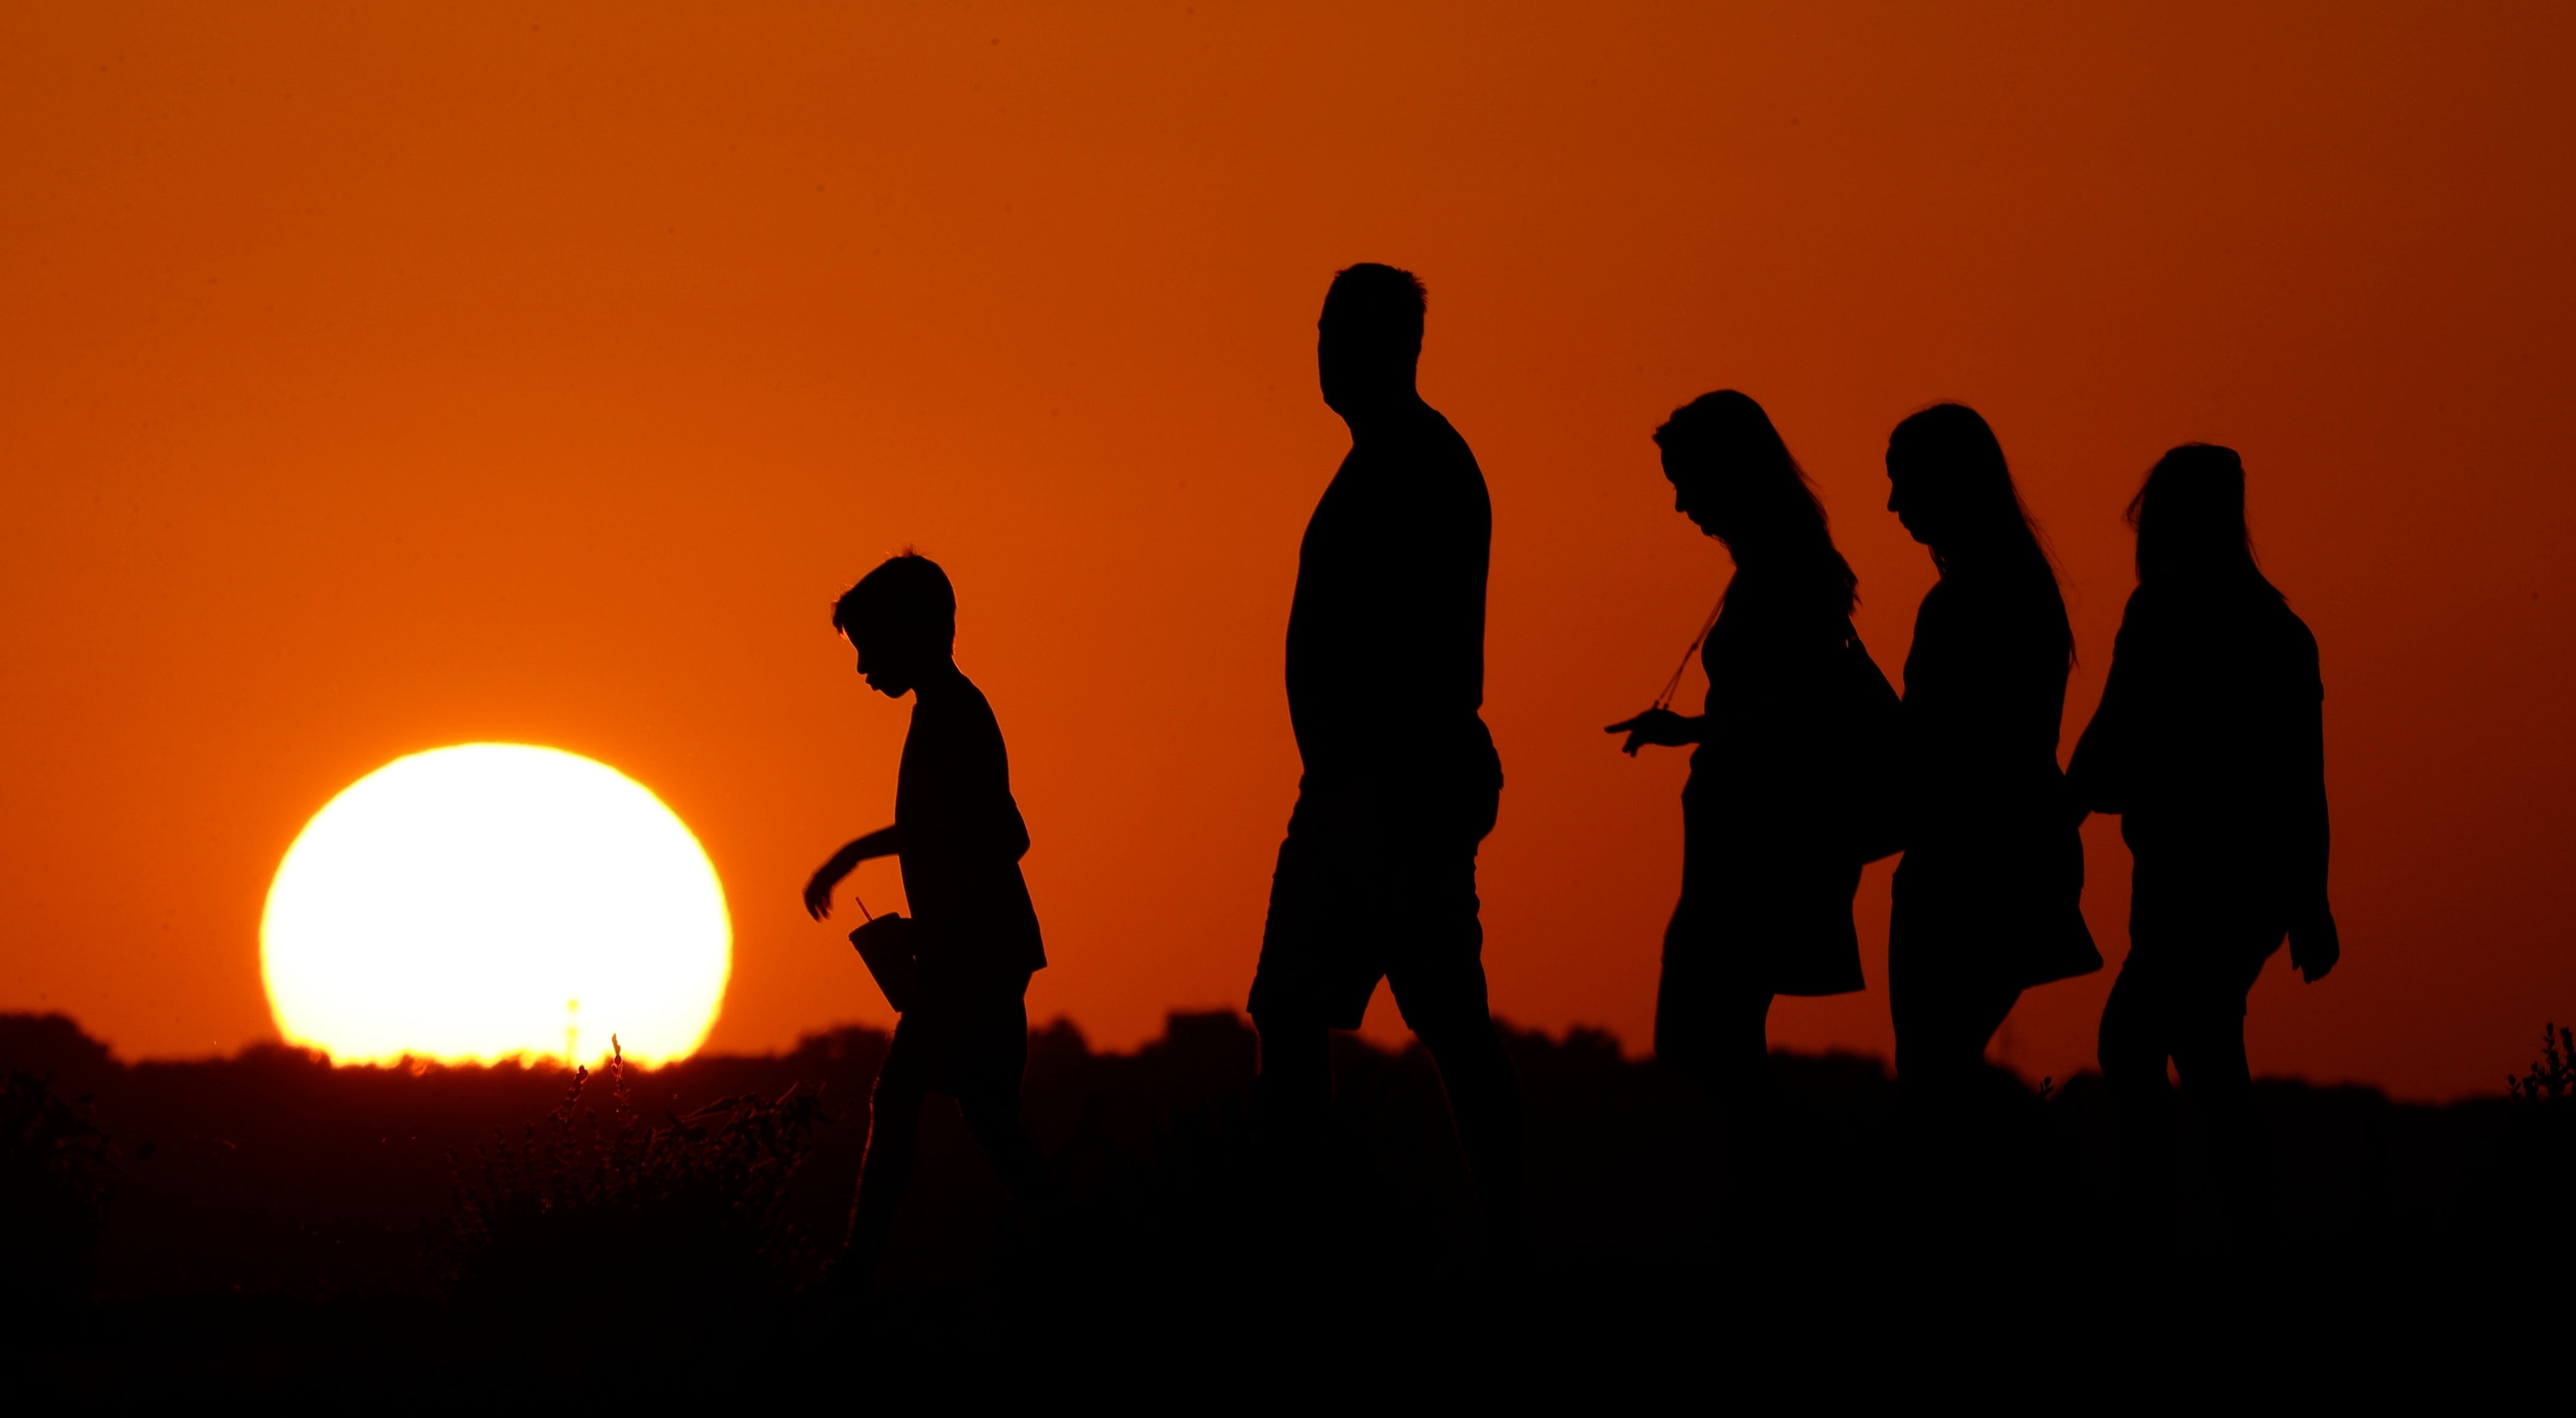 Hot weather will return to Central Plains, upper Midwest as heat dome expands across US